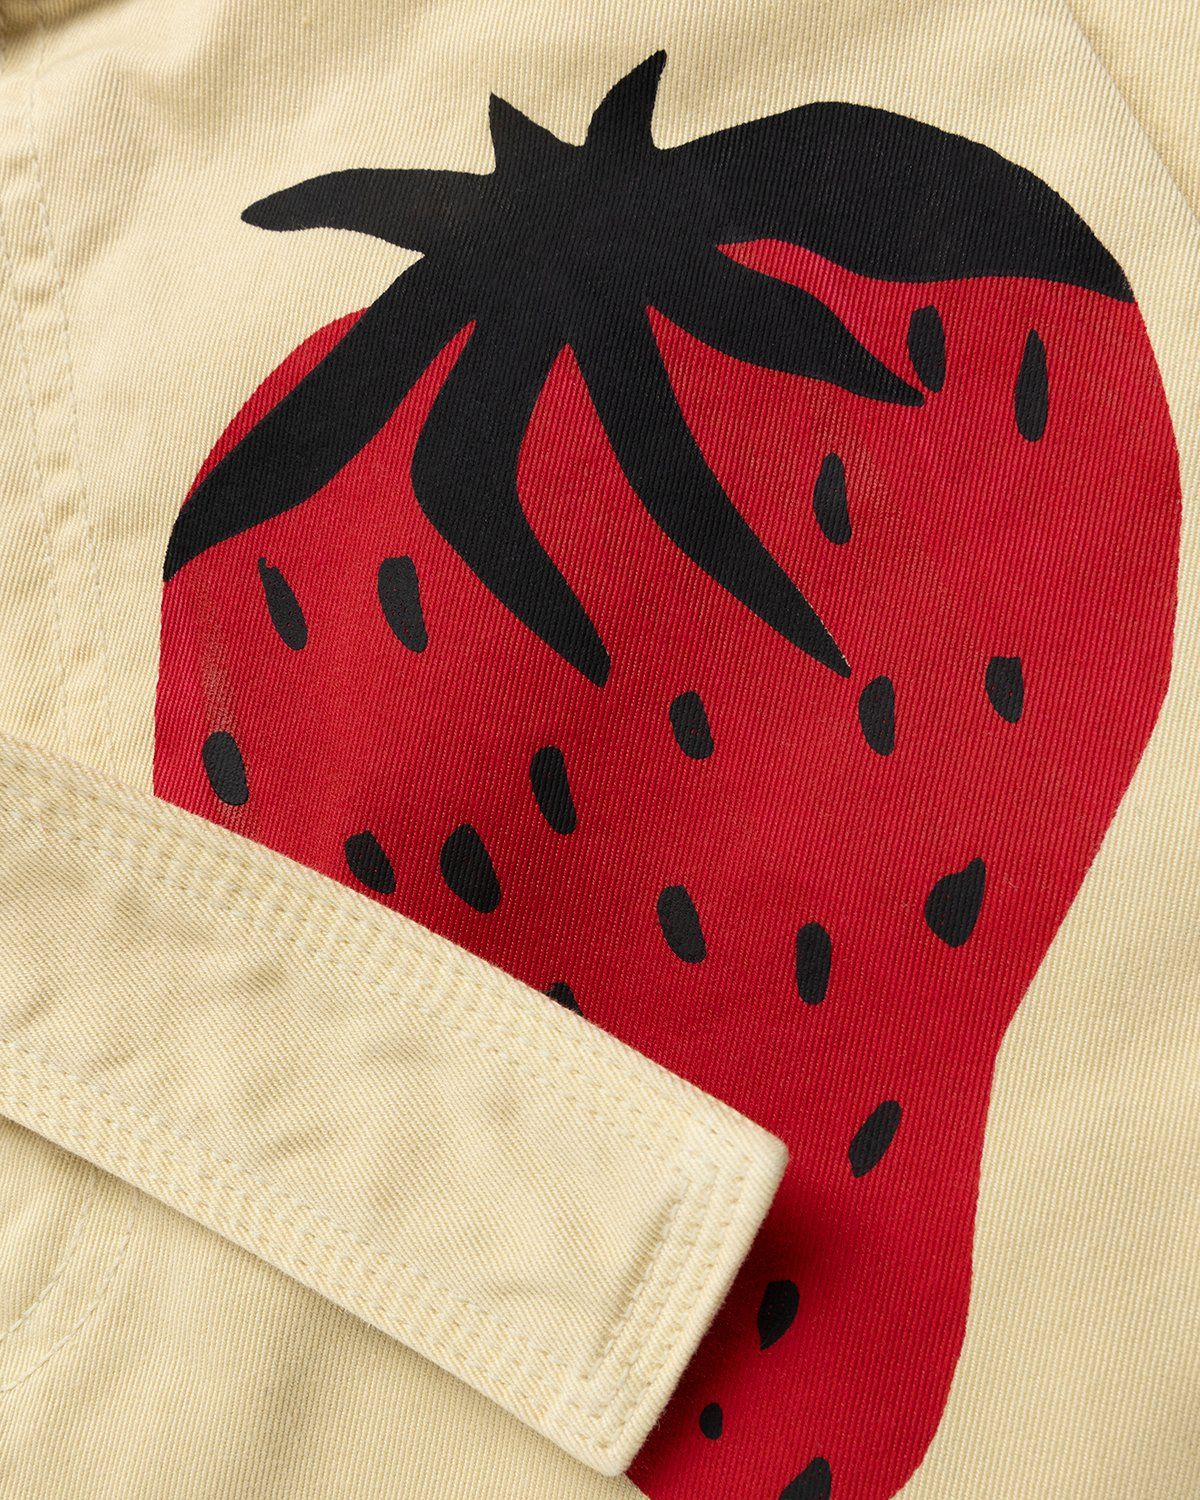 J.W. Anderson – Strawberry Chino Shorts Natural/Red - Short Cuts - Beige - Image 5